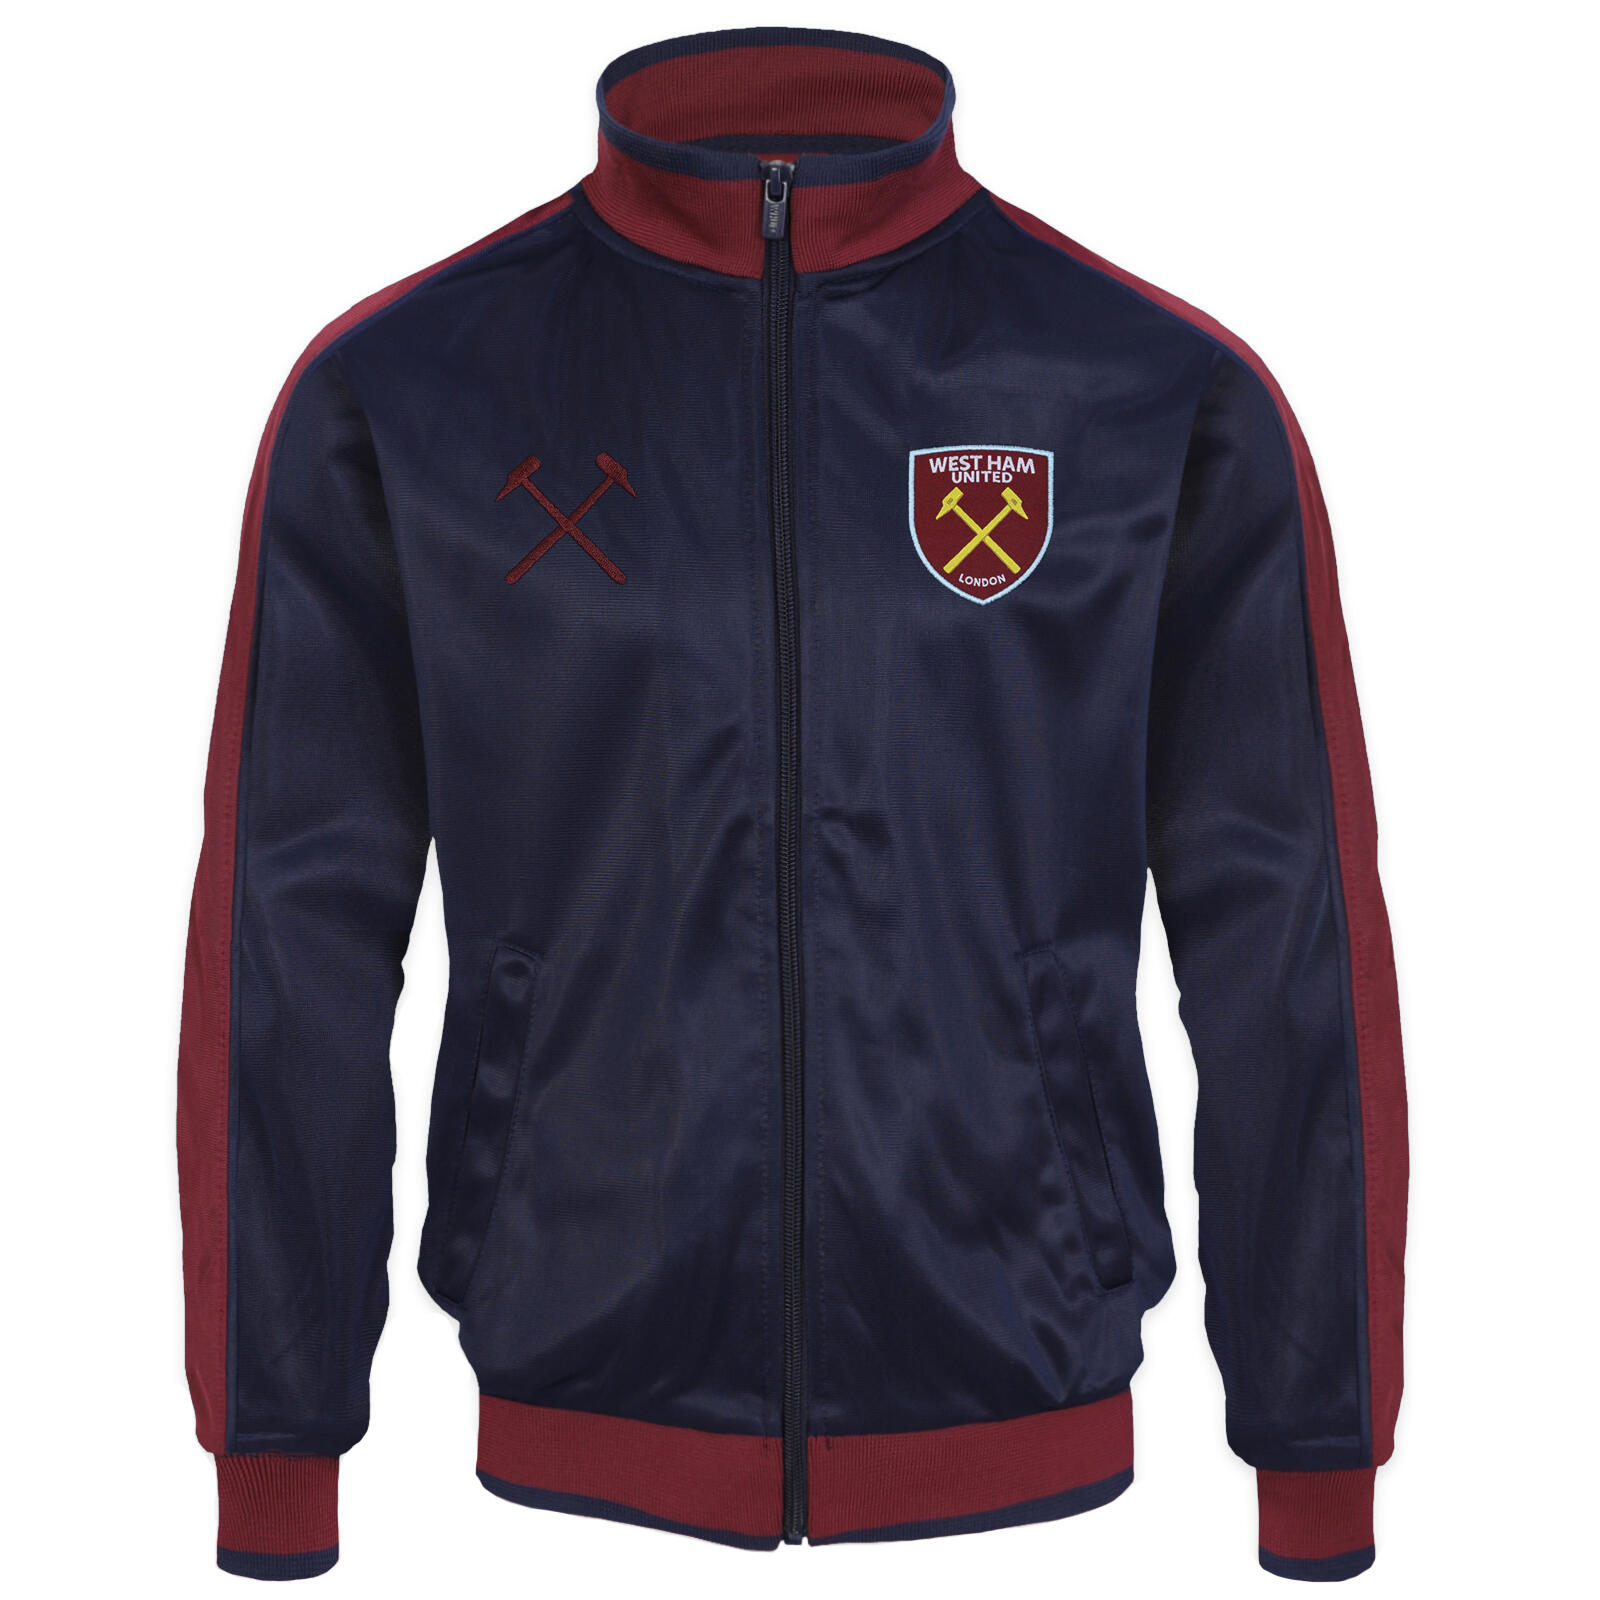 West Ham United Boys Jacket Track Top Retro Kids OFFICIAL Football Gift 1/6